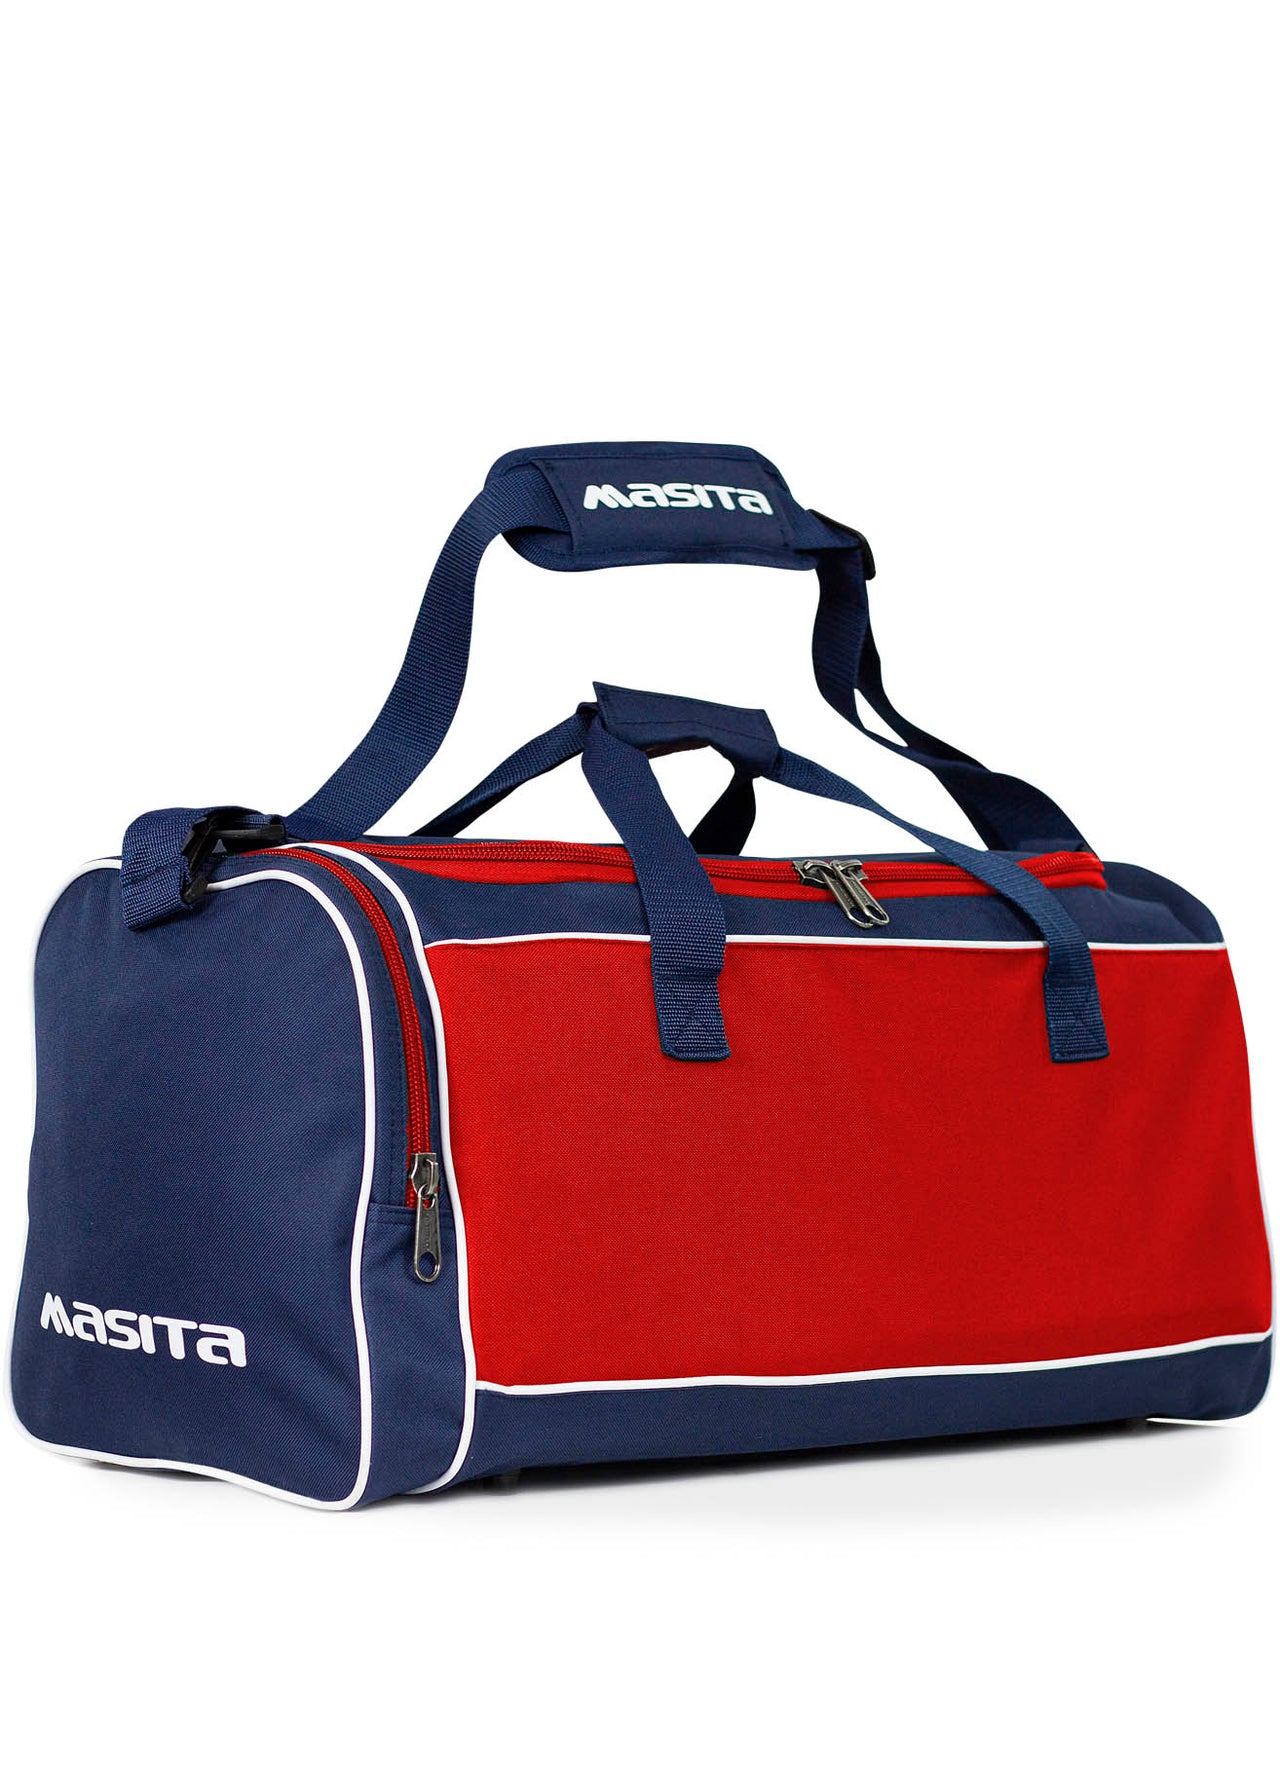 Forza Sports Bag Red/Navy/White